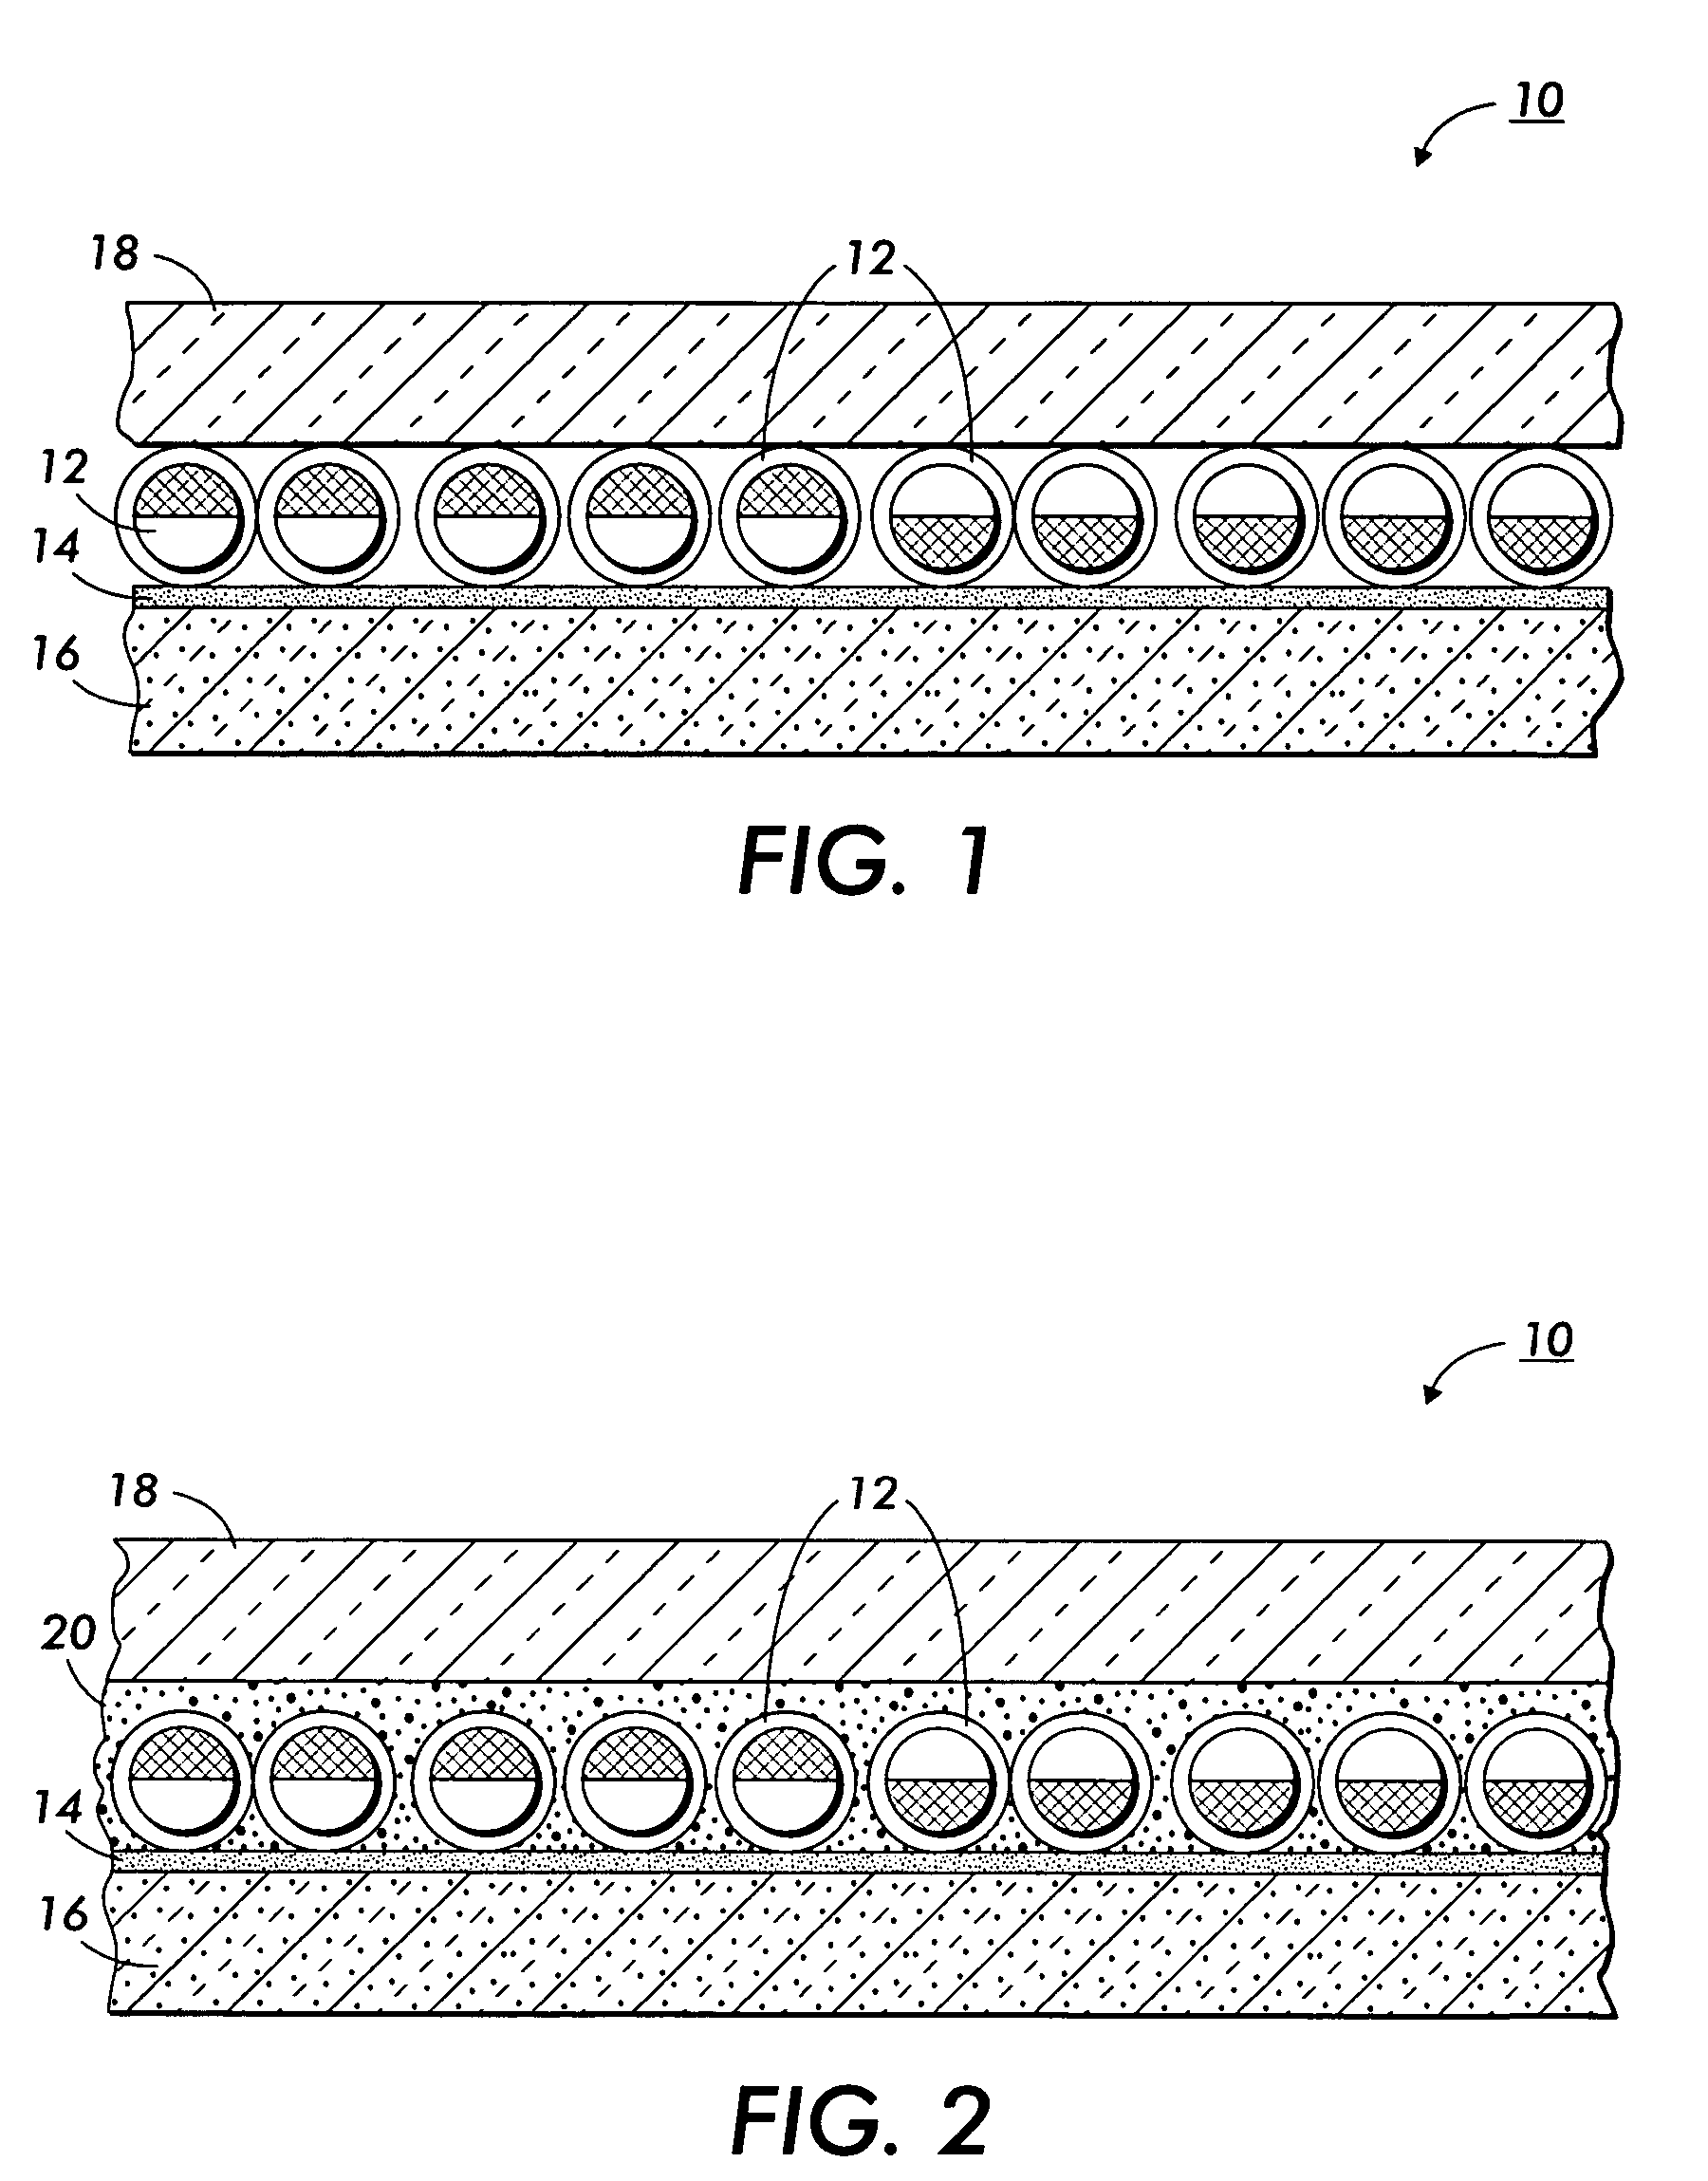 Contrast enhancement in multichromal display by incorporating a highly absorptive layer